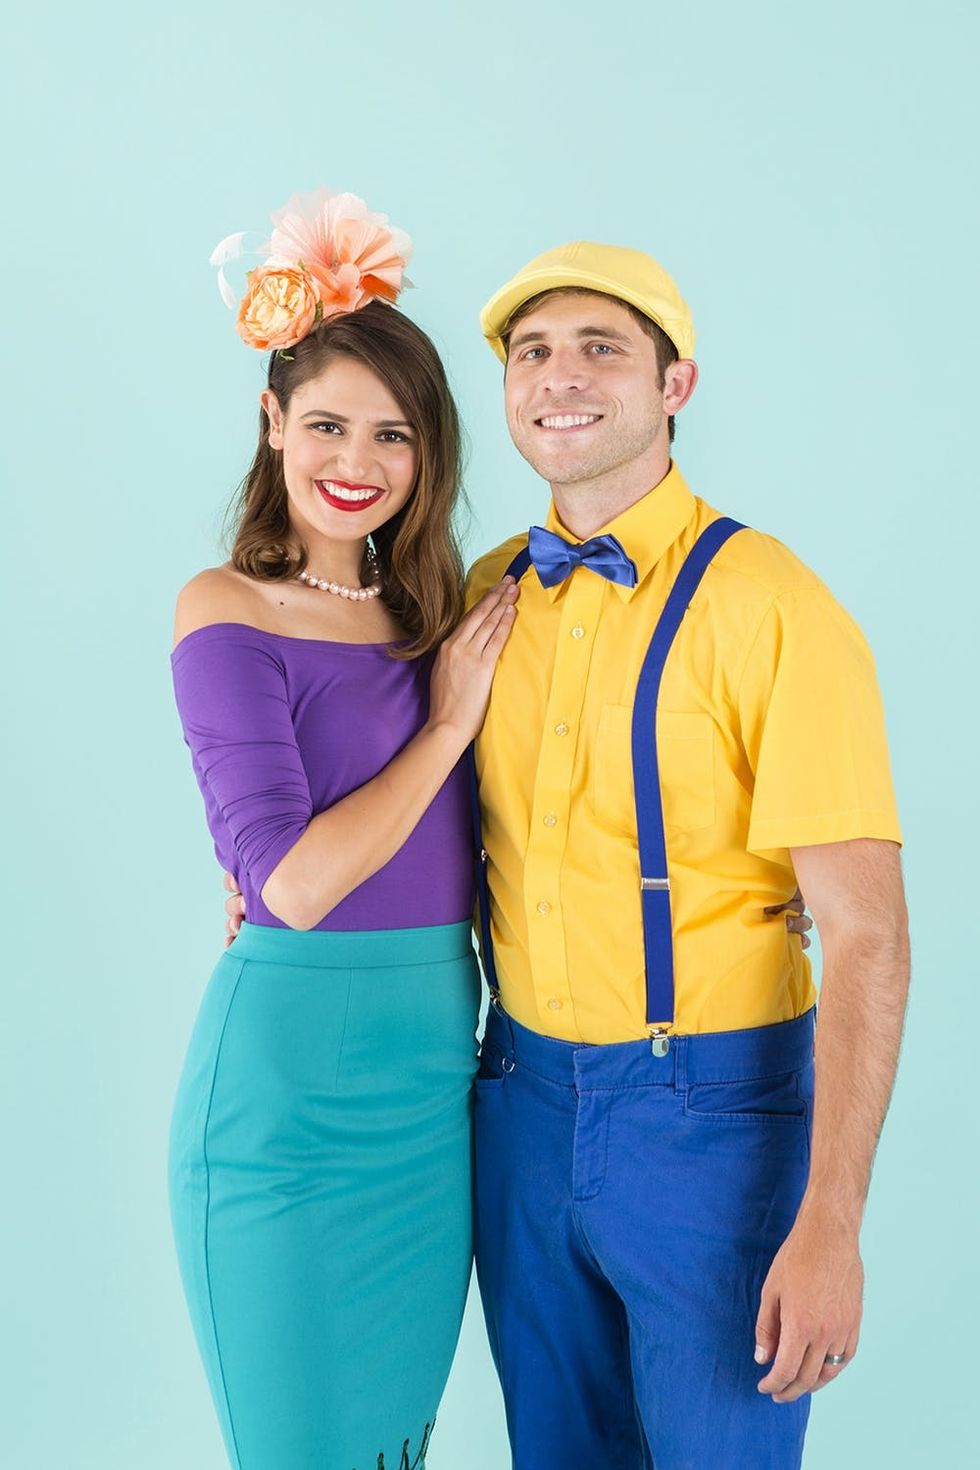 These 4 Dapper Disney Couples Costumes Will Give You a Magical ...